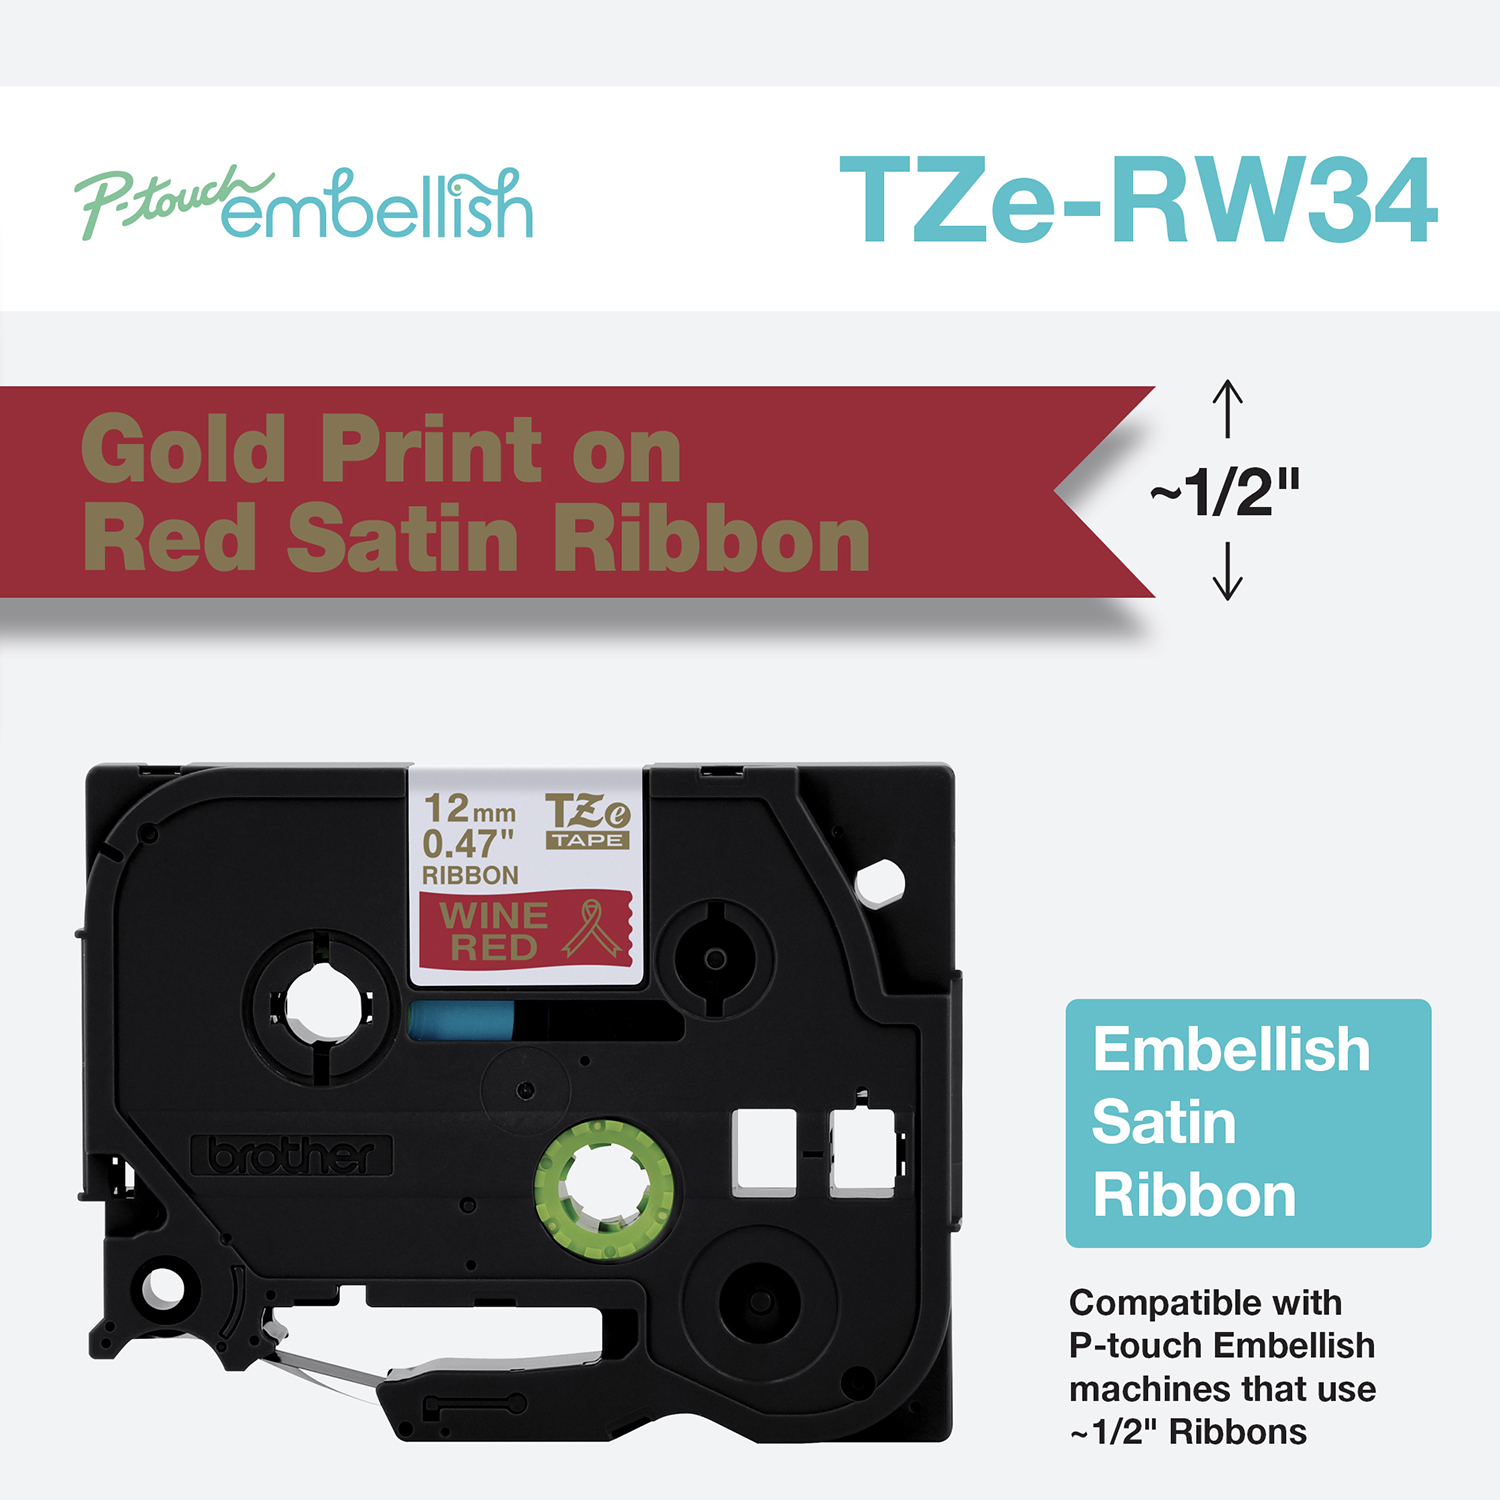 Details about   3PK Embellish Satin Ribbon Label Tape Gold on Red for Brother TZe-RW34 TZ-RW34 